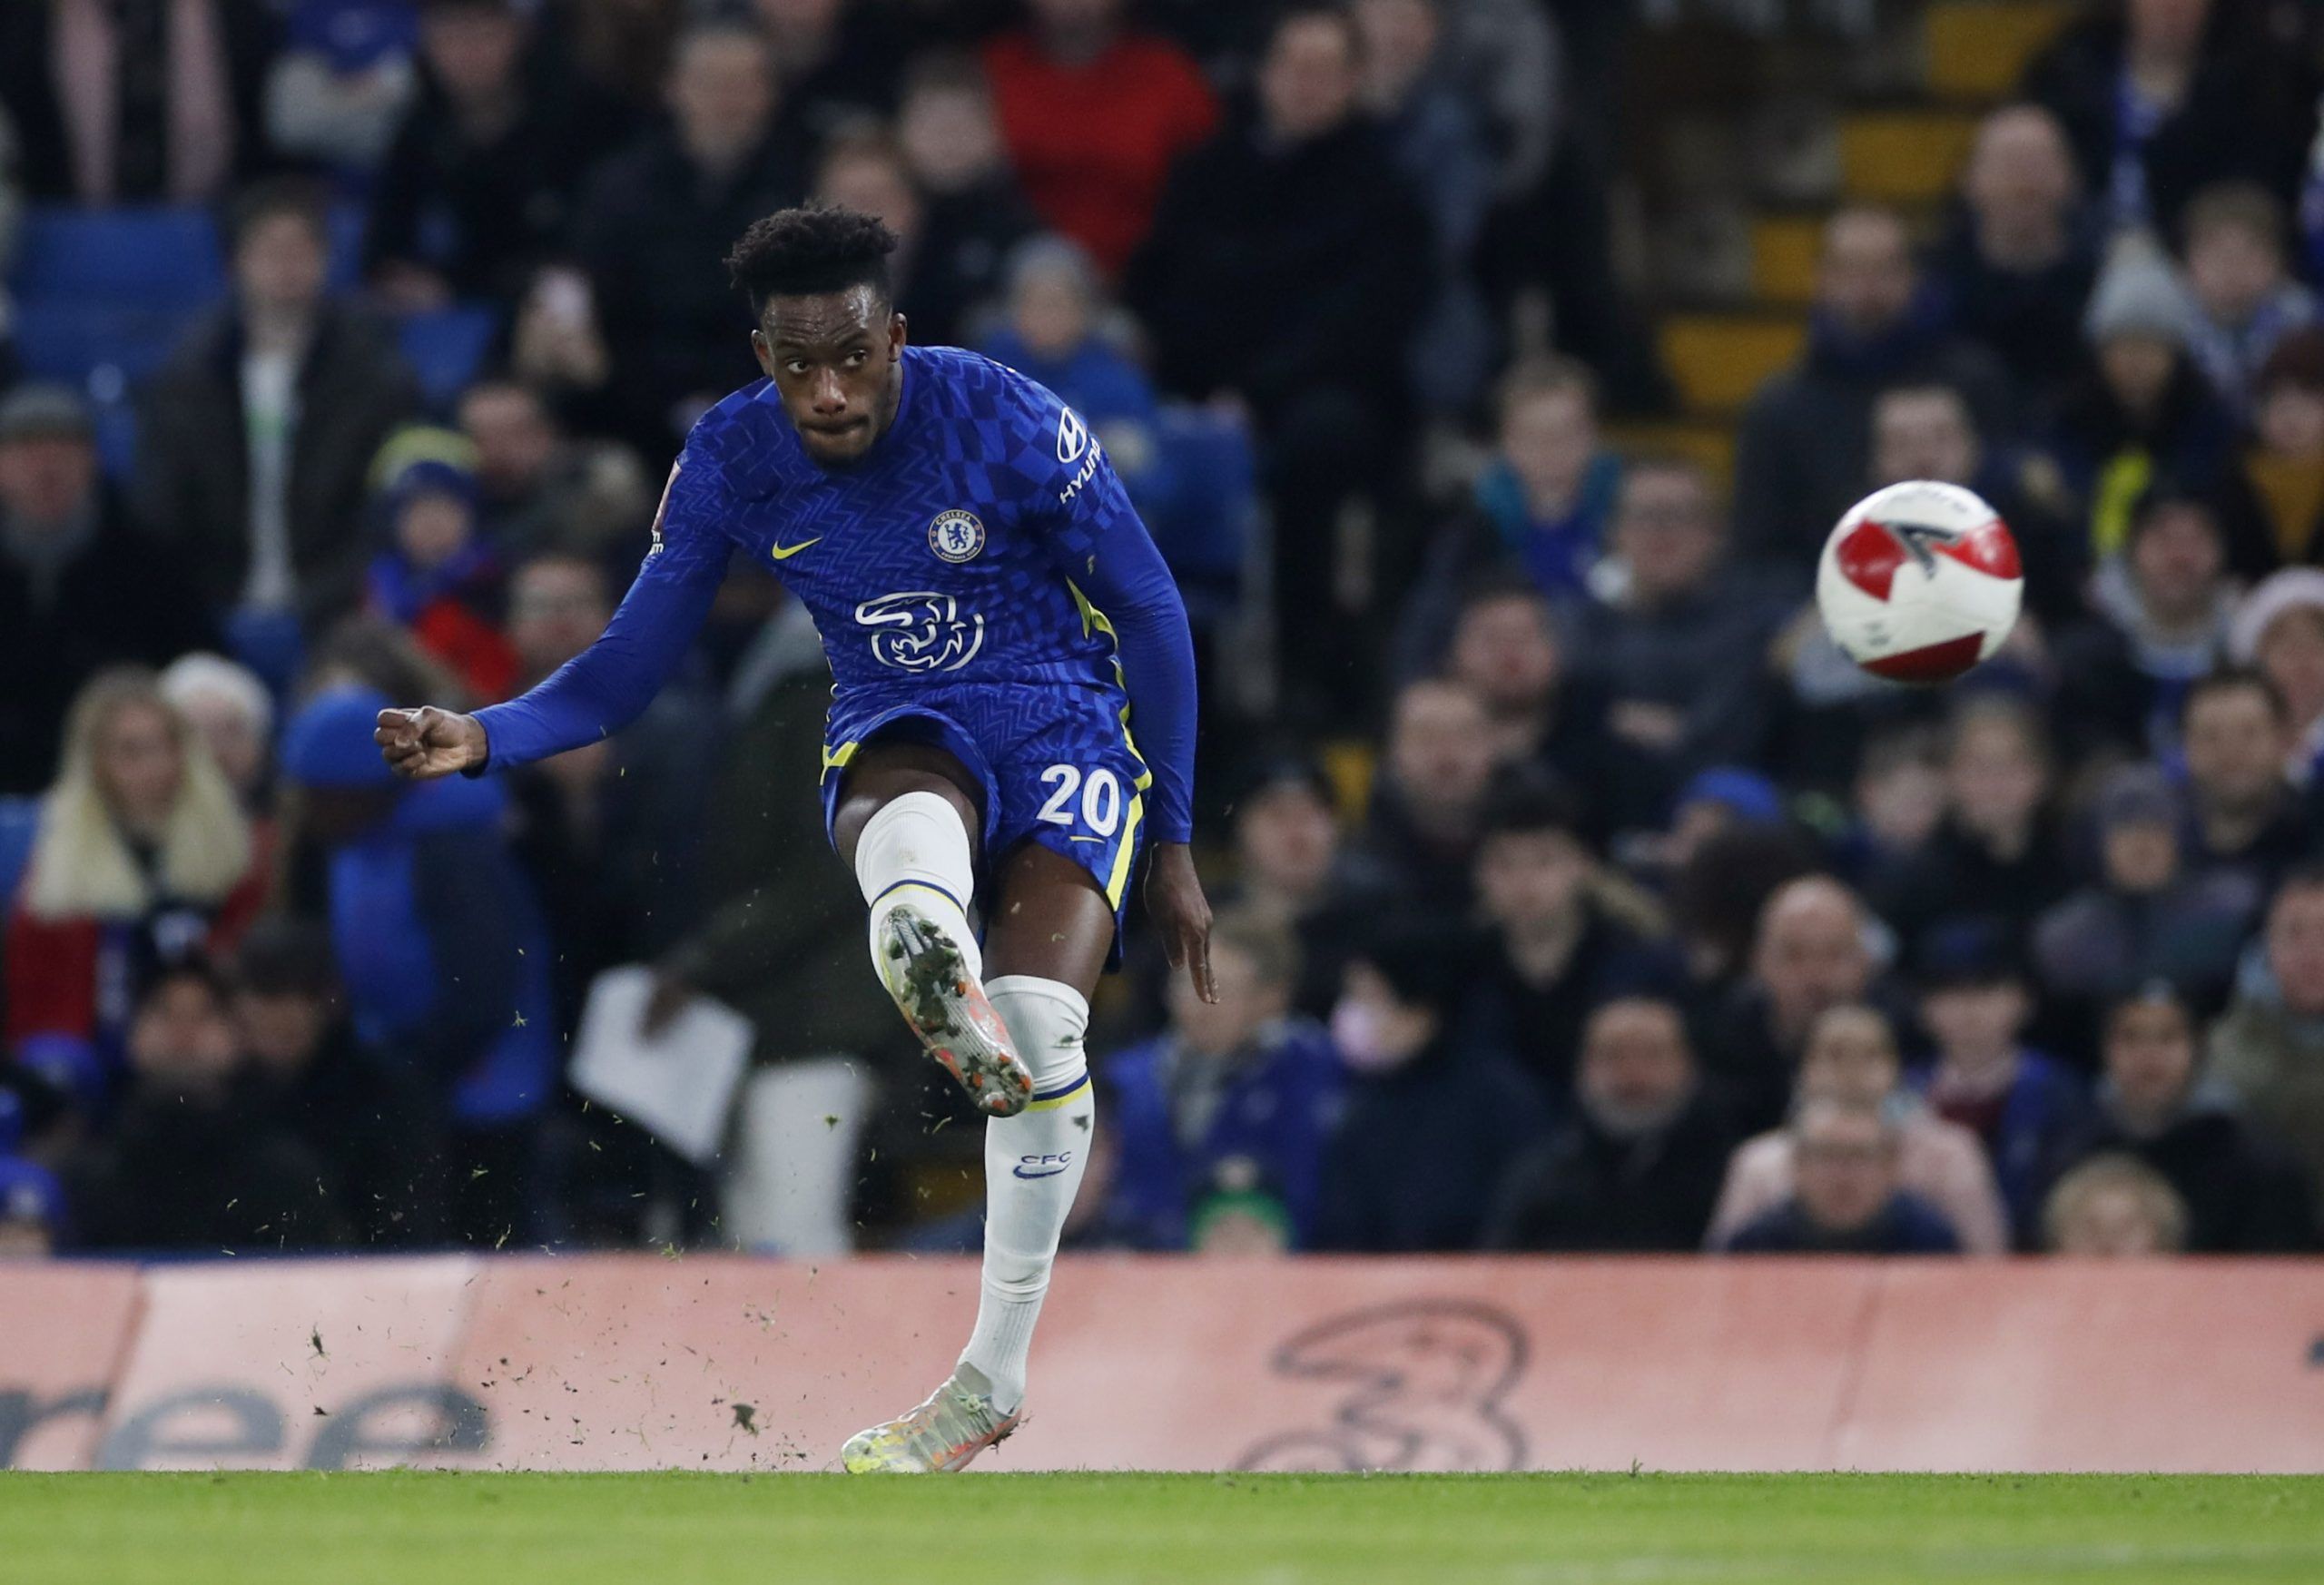 Soccer Football - FA Cup Third Round - Chelsea v Chesterfield - Stamford Bridge, London, Britain - January 8, 2022  Chelsea's Callum Hudson-Odoi scores their second goal Action Images via Reuters/Paul Childs